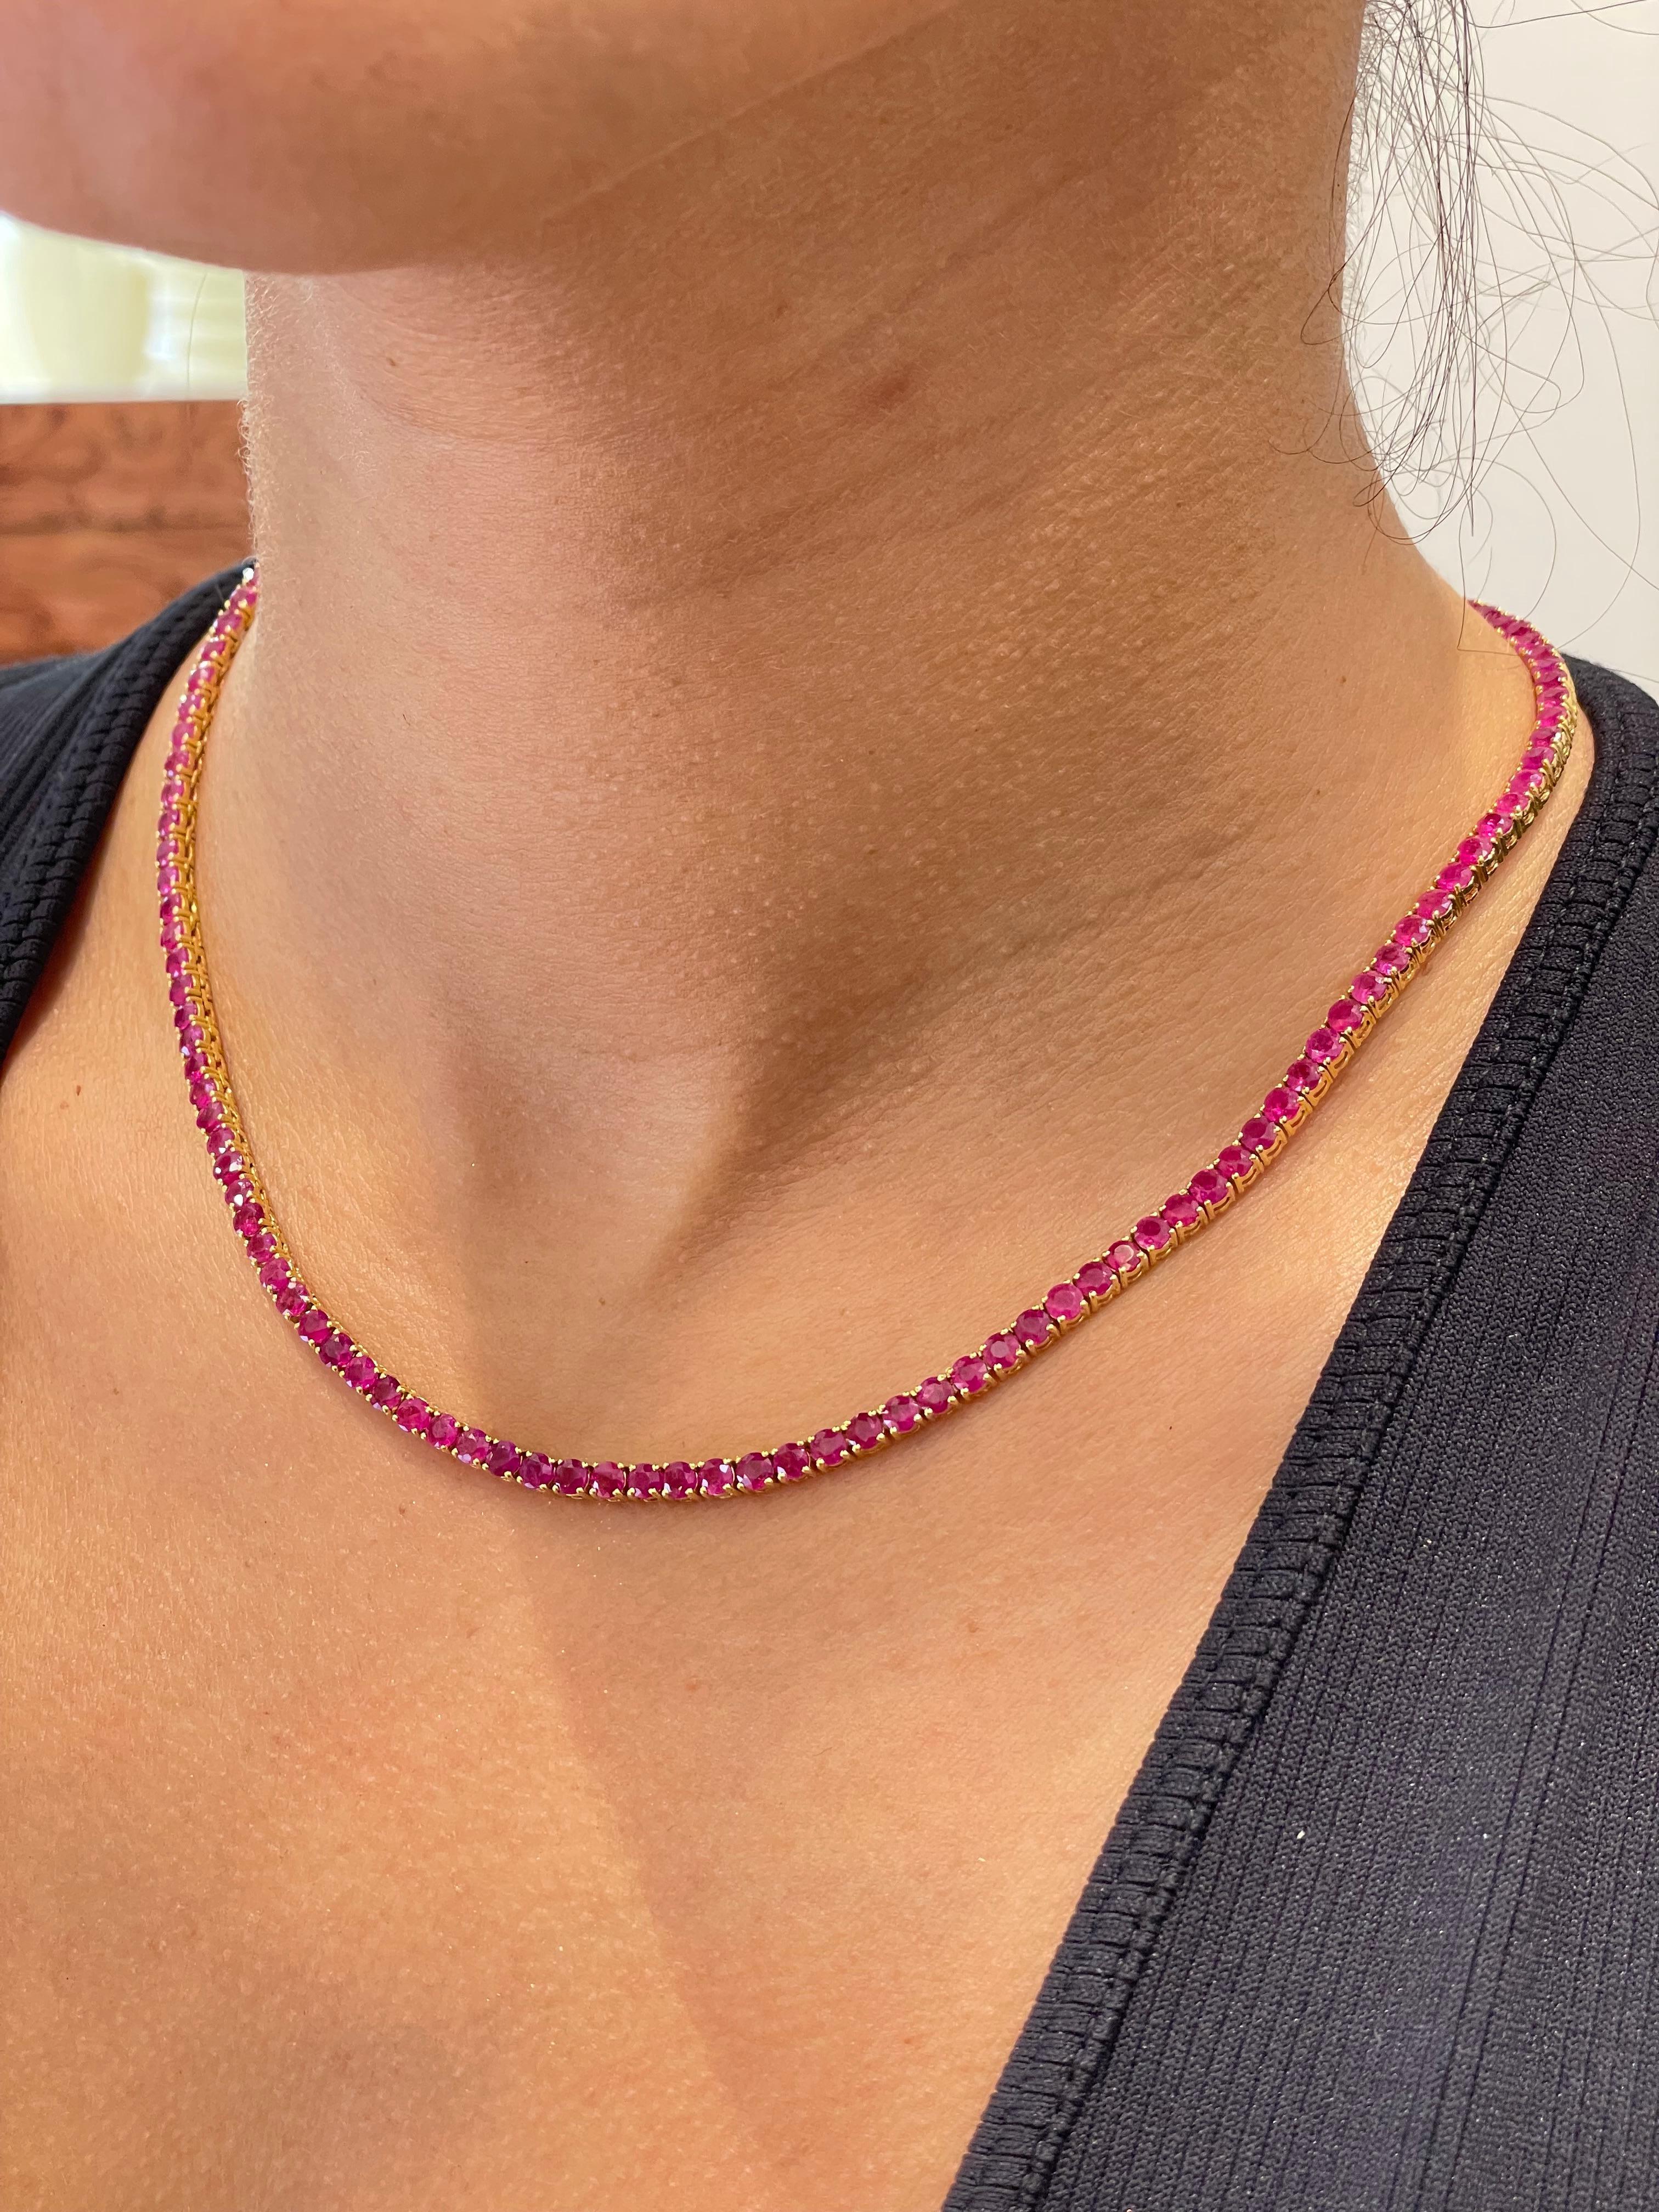 An impressive classic Tennis
Necklace a line that features a substantial total Ruby weight of 20.28 Carats in beautifully graduated Round Cut gems.
each stone has a four-claw setting with open gallery and set in 18 Karat yellow Gold, essential for a